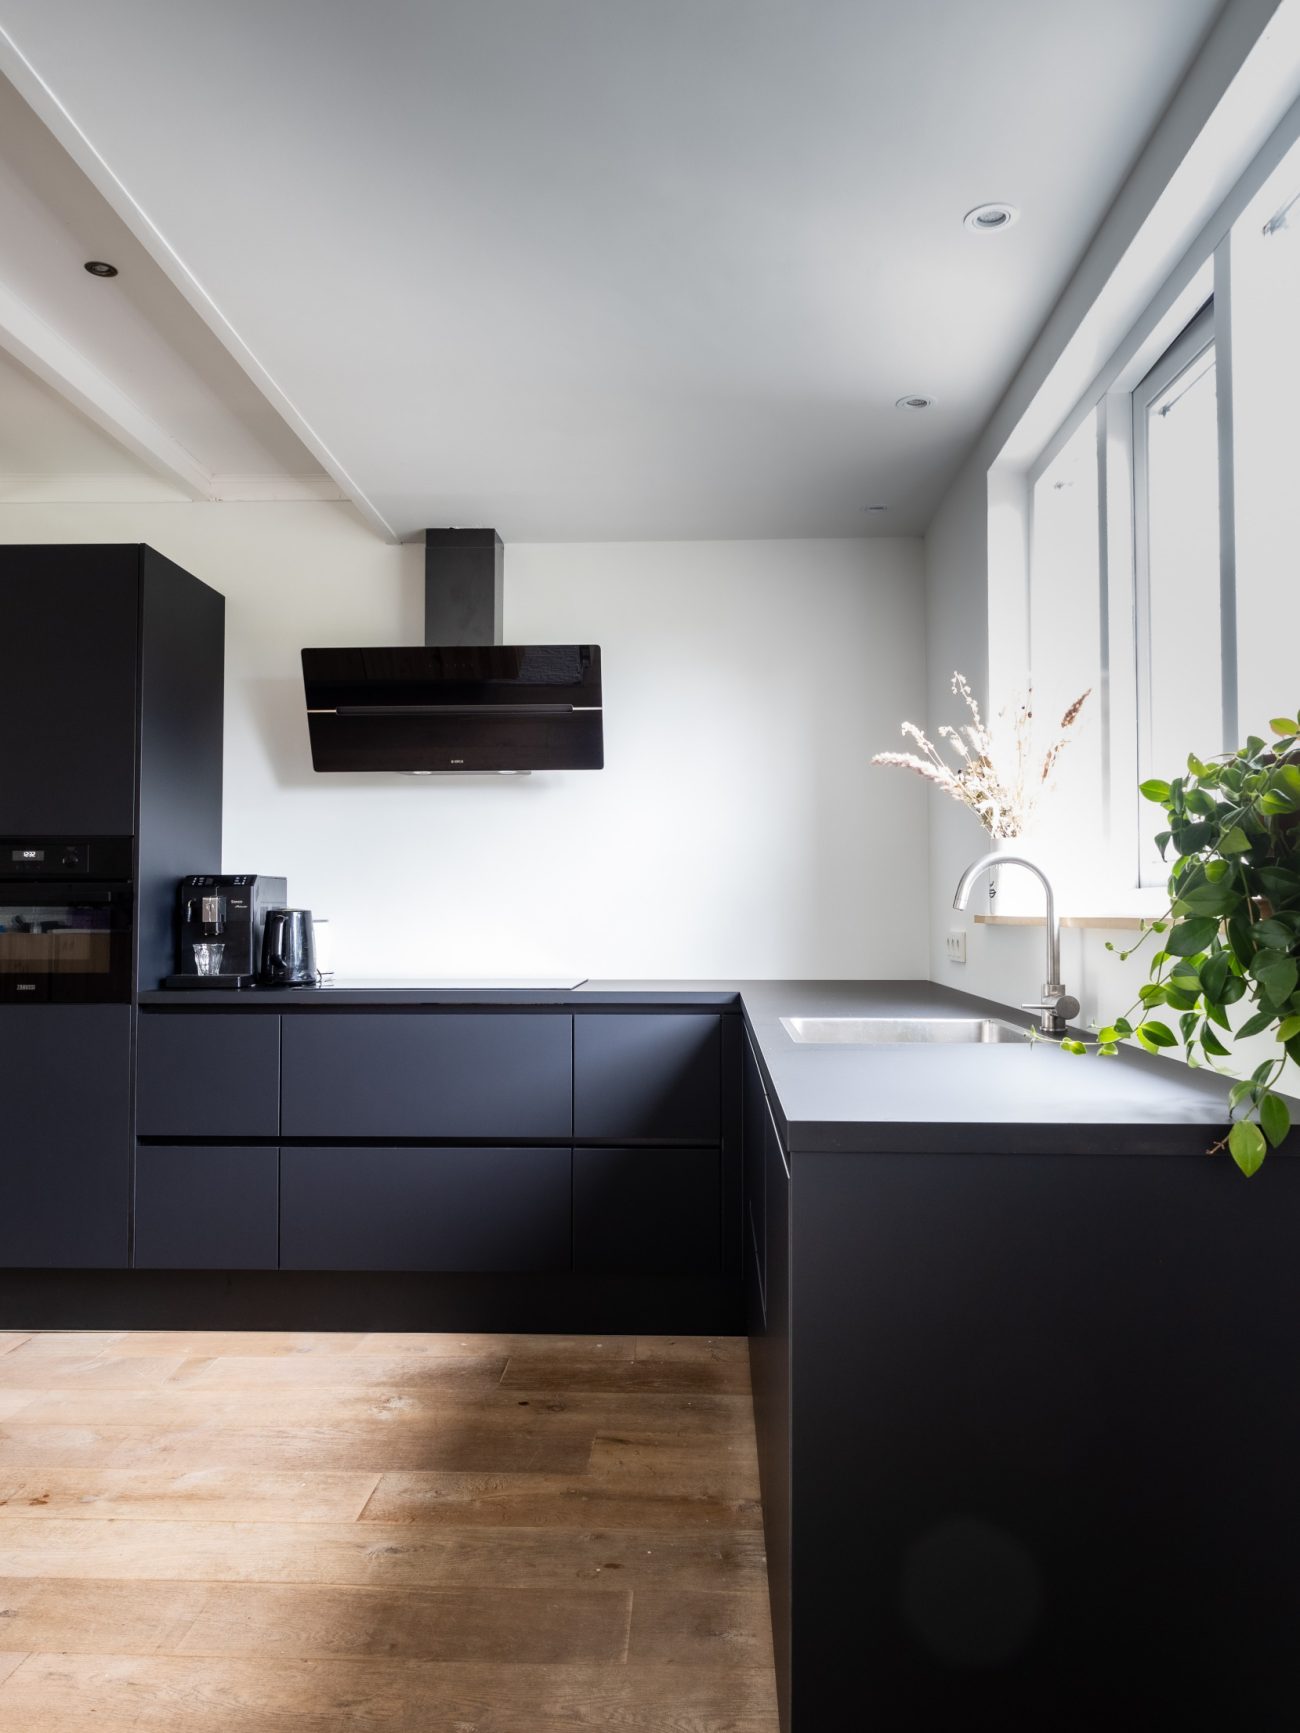 Interior kitchen with large black countertop, preparation area and sink under the window